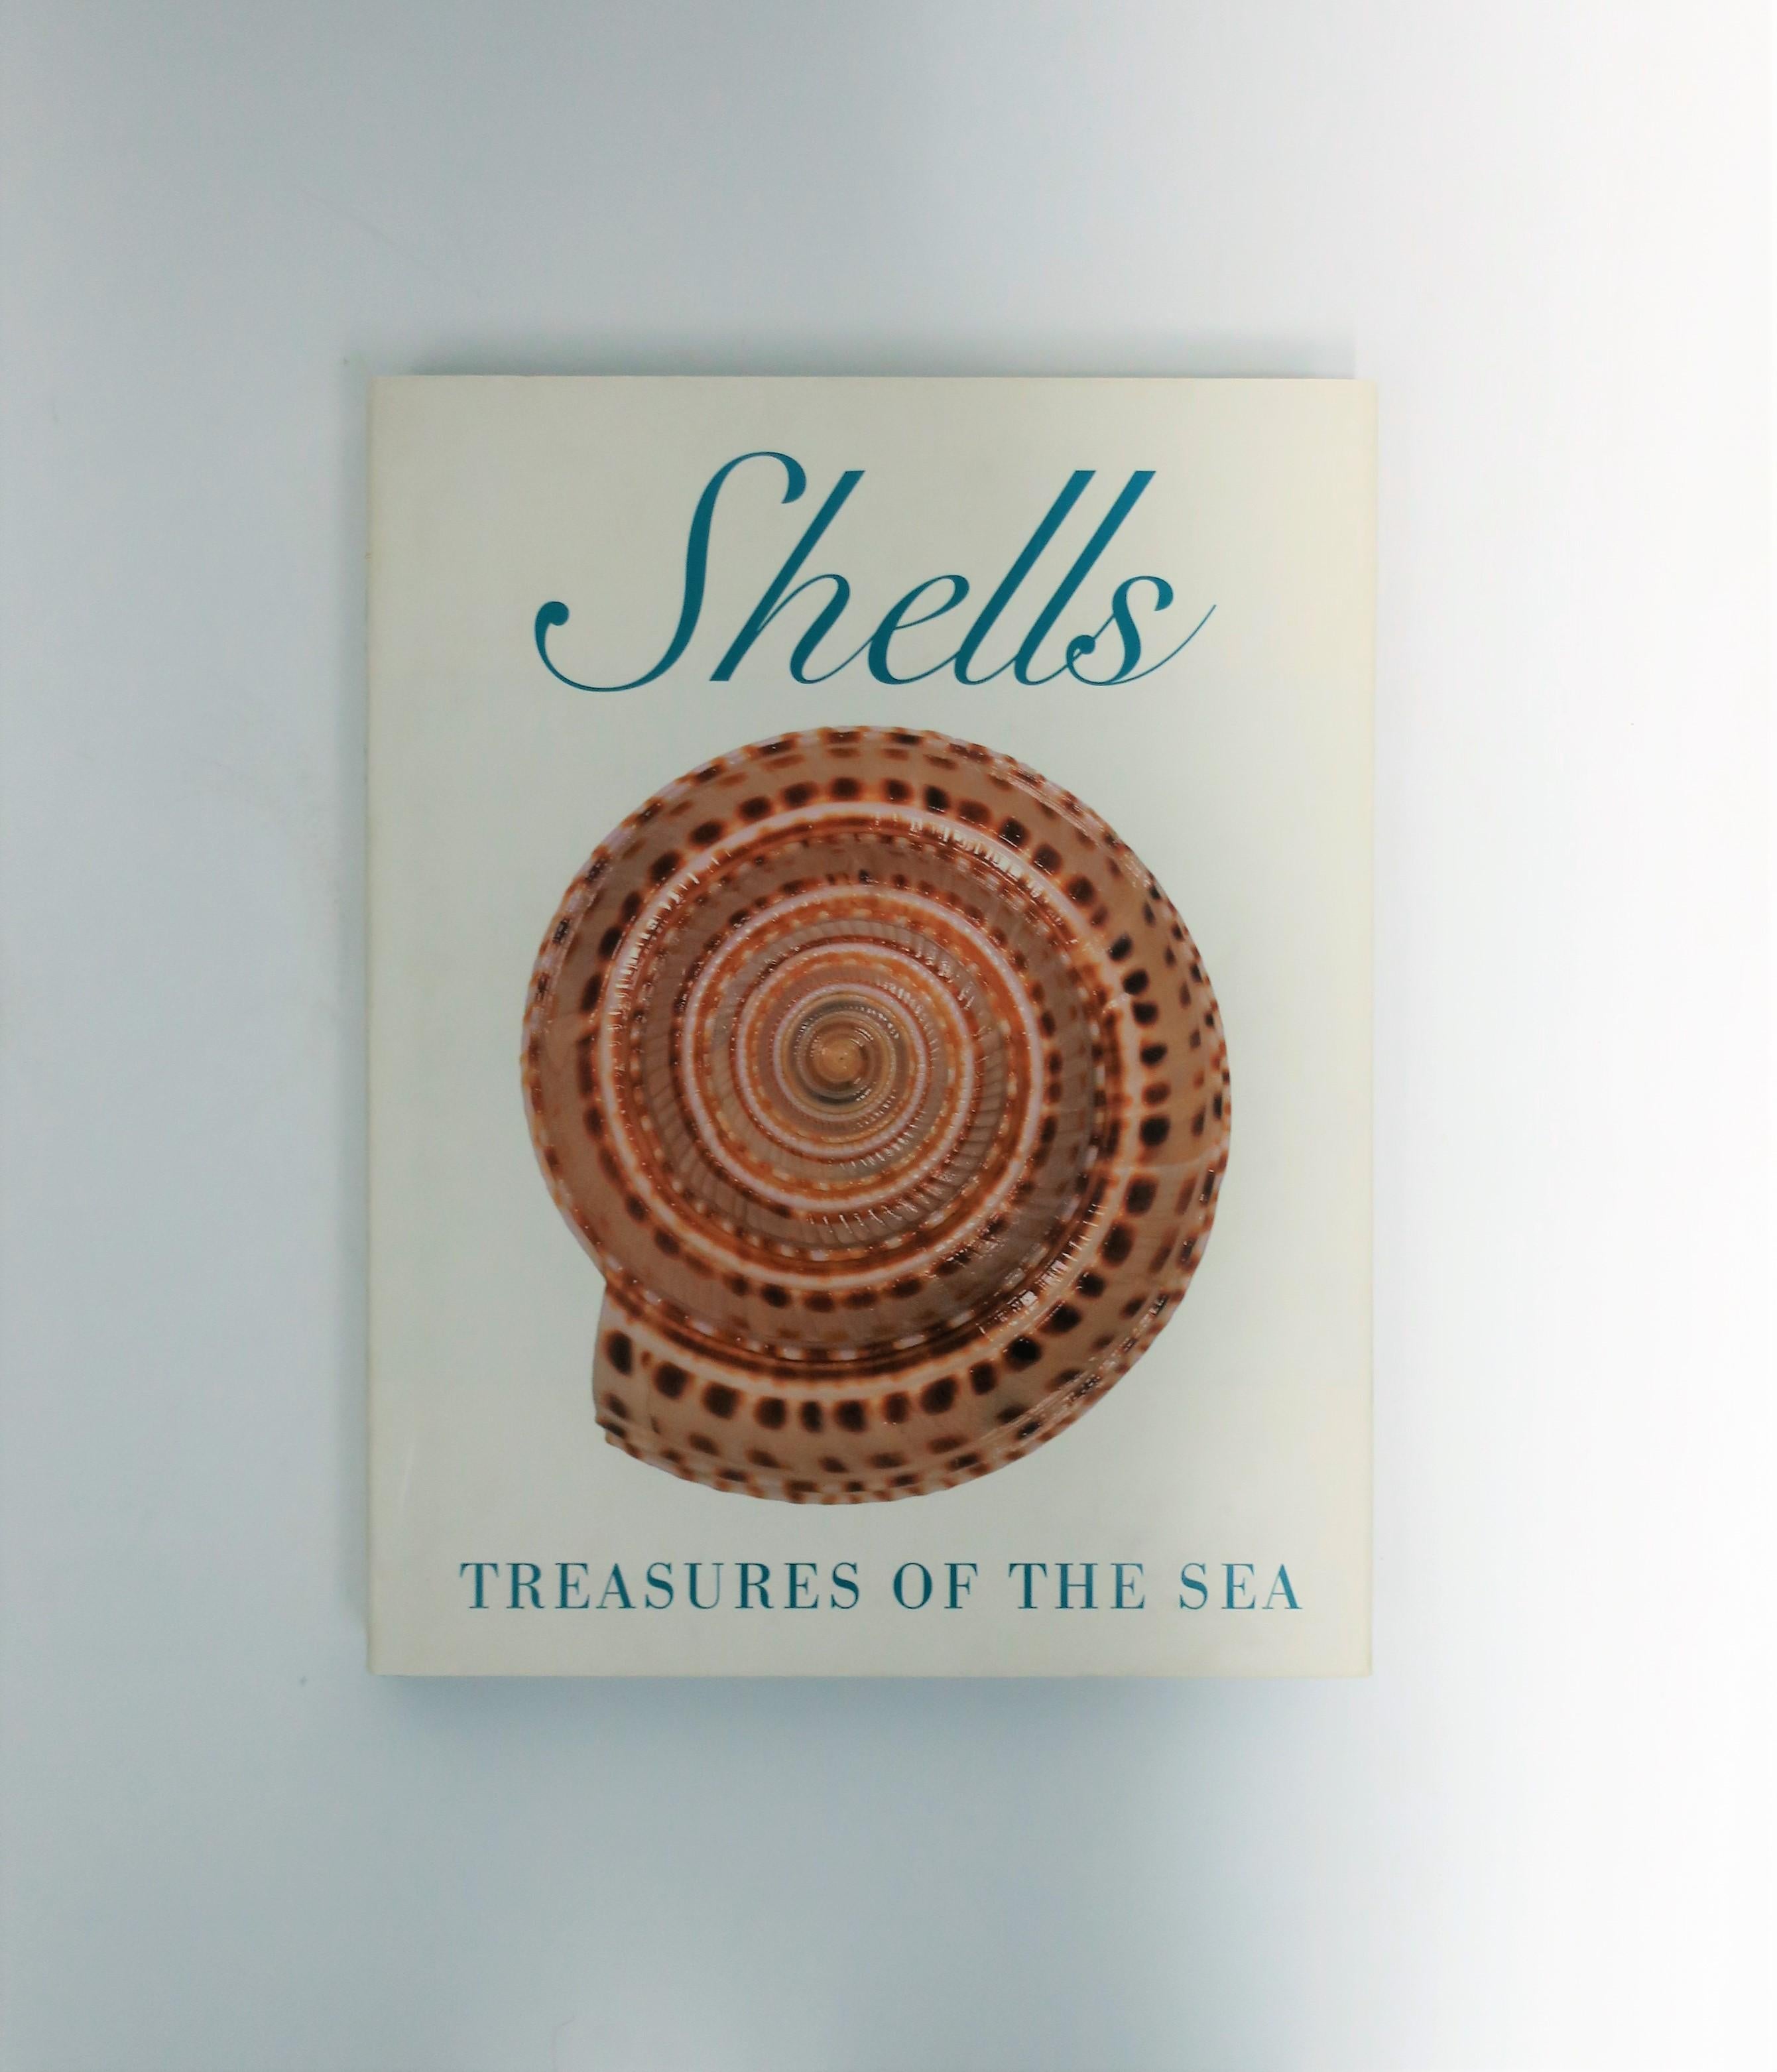 Beautiful vintage coffee table book, shells: 'Treasures of the Sea', circa 1990s. Shells: 'Treasures of the Sea' is an incredible book, beautifully done, and informative. This coffee table or library book is dedicated to the history of the shell